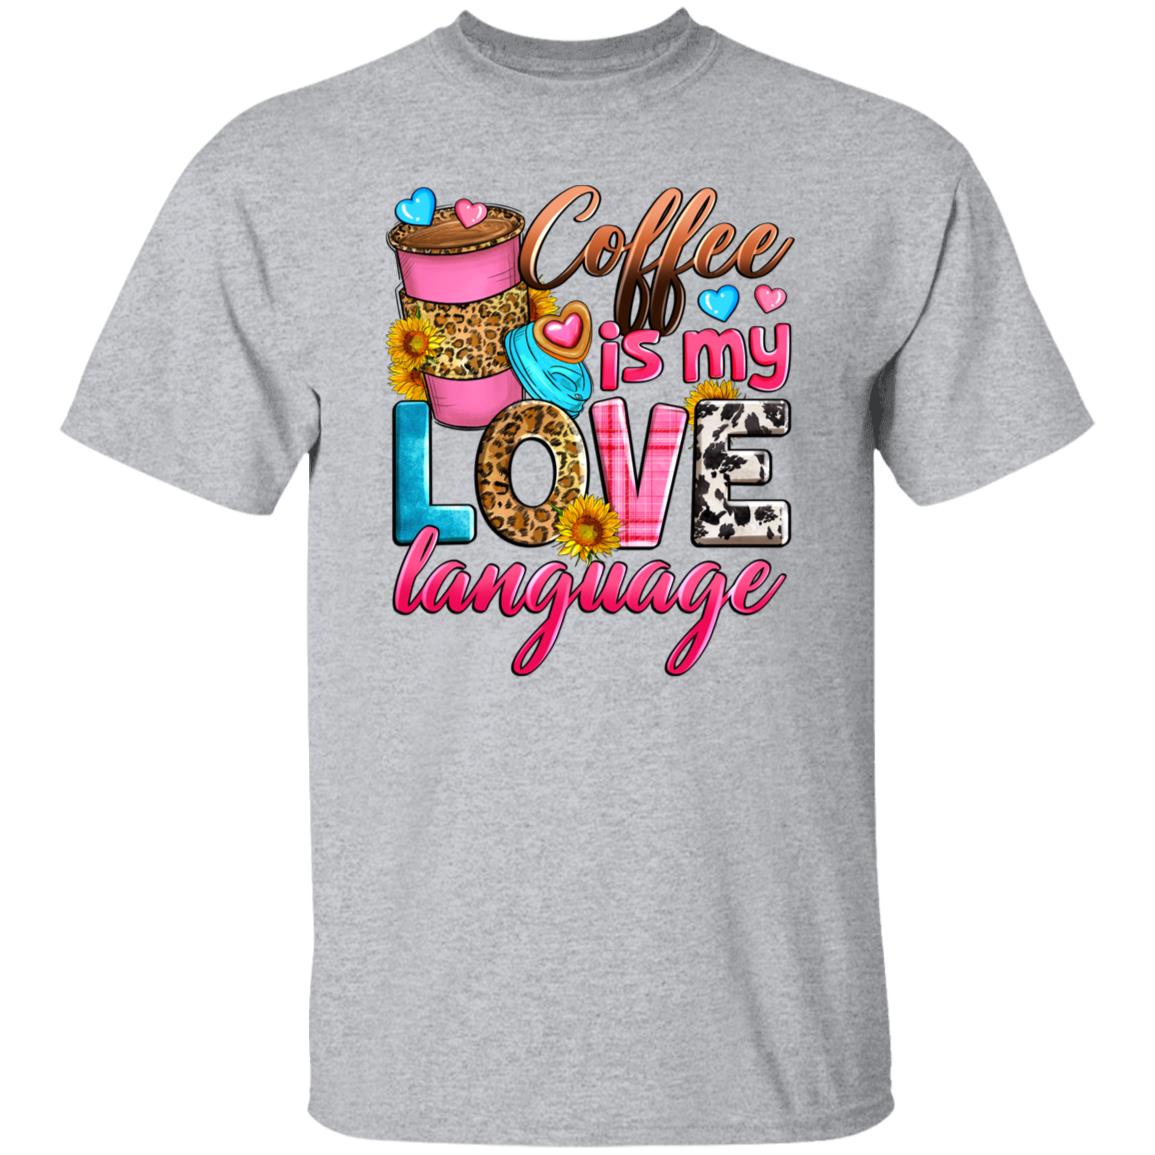 Coffee is my love language T-Shirt Barista coffee lover Unisex tee White Sand Sport Grey-Family-Gift-Planet